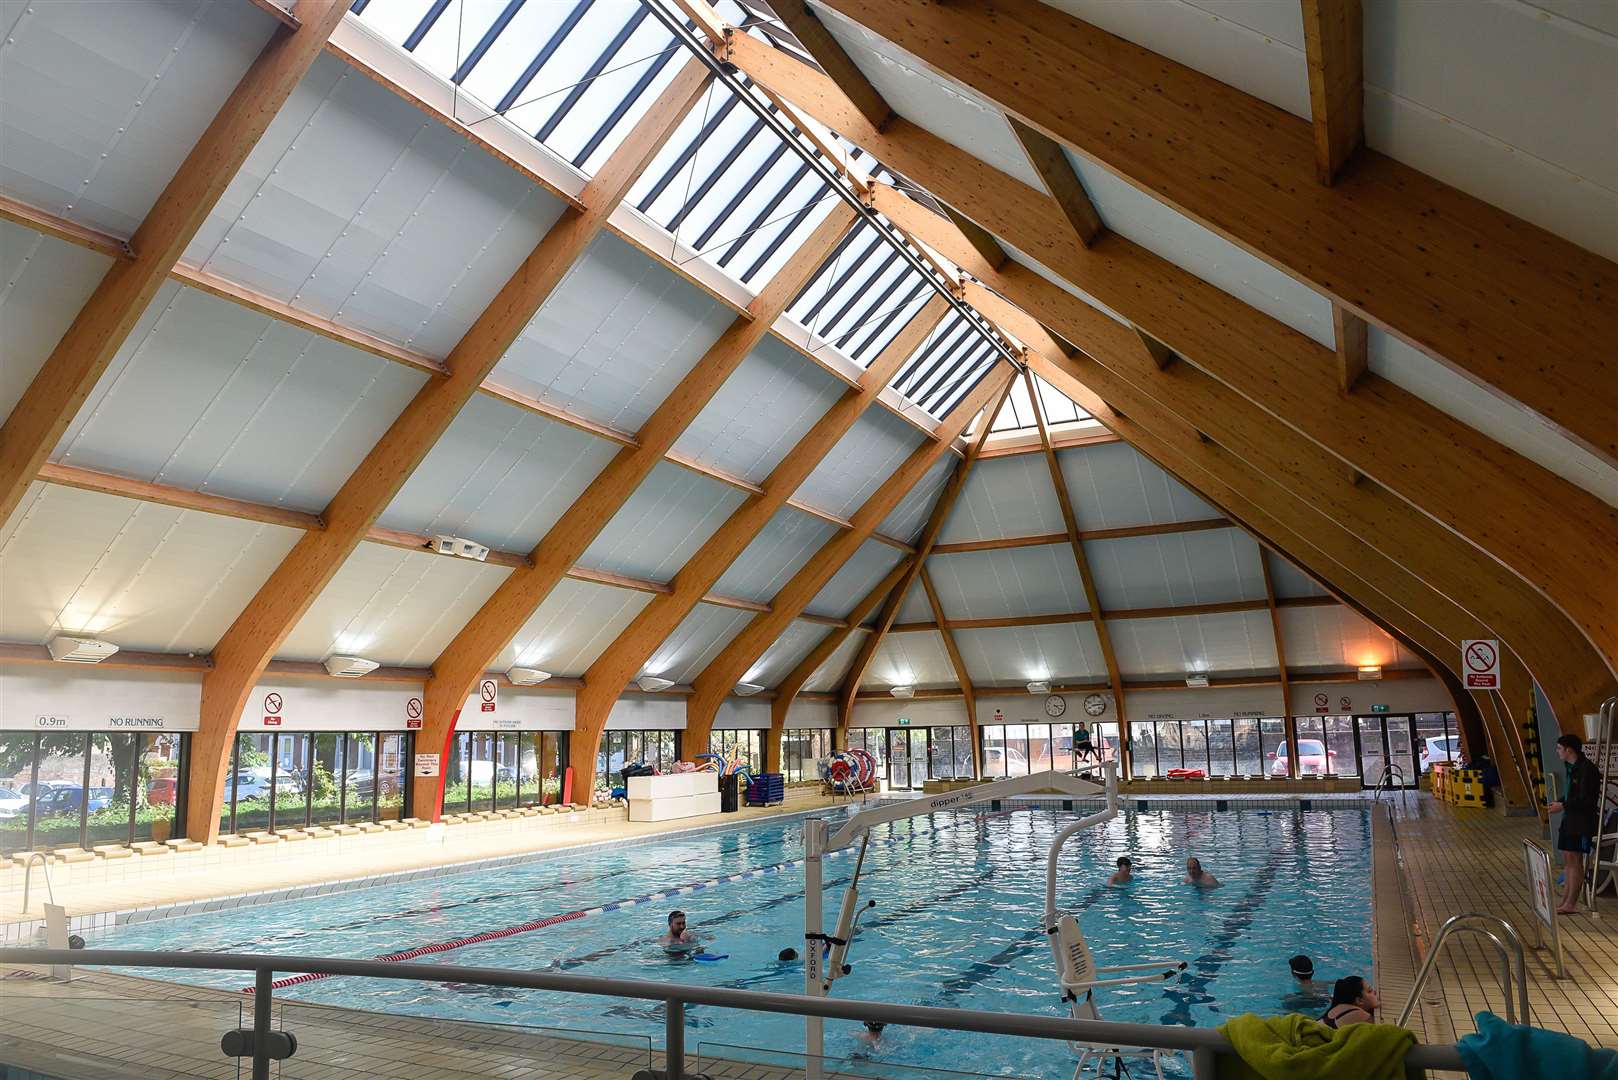 The indoor pool will reopen in September. Picture: Alan Langley